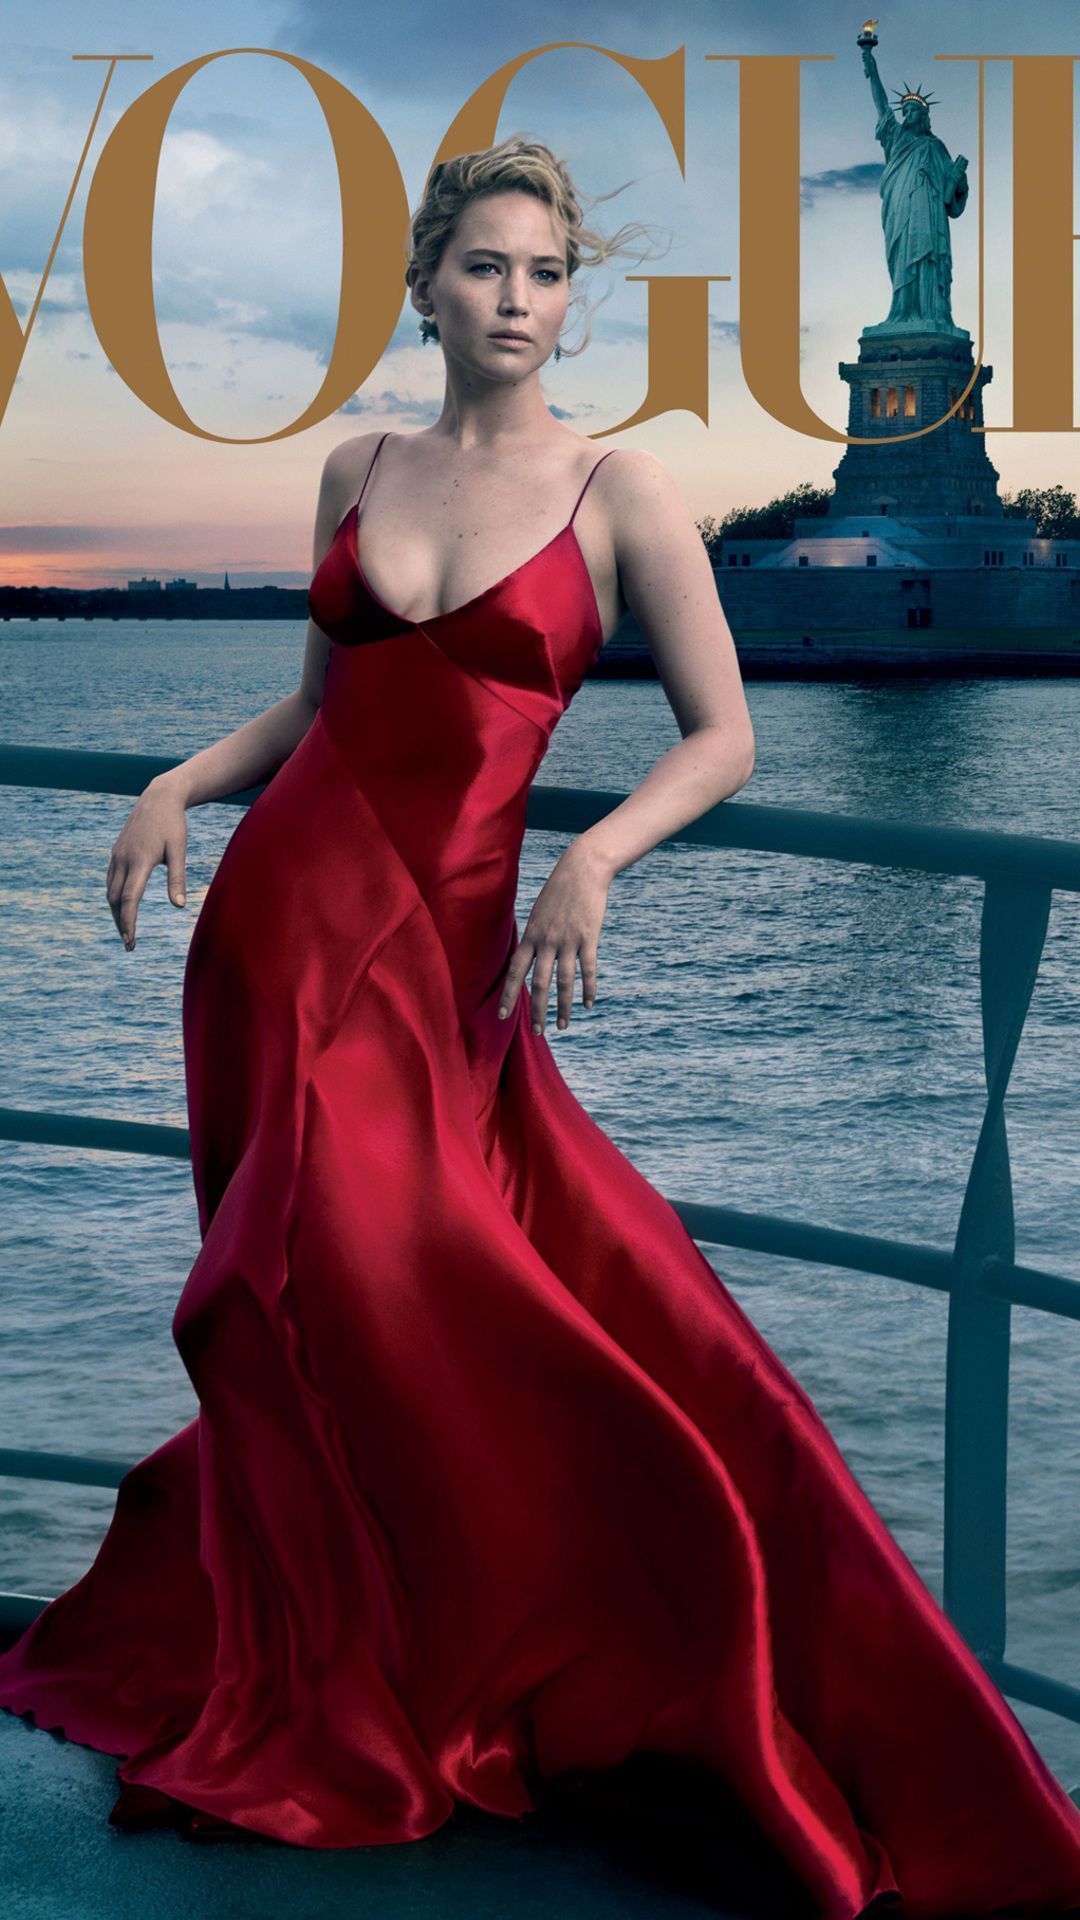 A stunning portrait of Jennifer Lawrence in a flowing red gown, taken on the deck of a ship with the Statue of Liberty in the background.  - Jennifer Lawrence